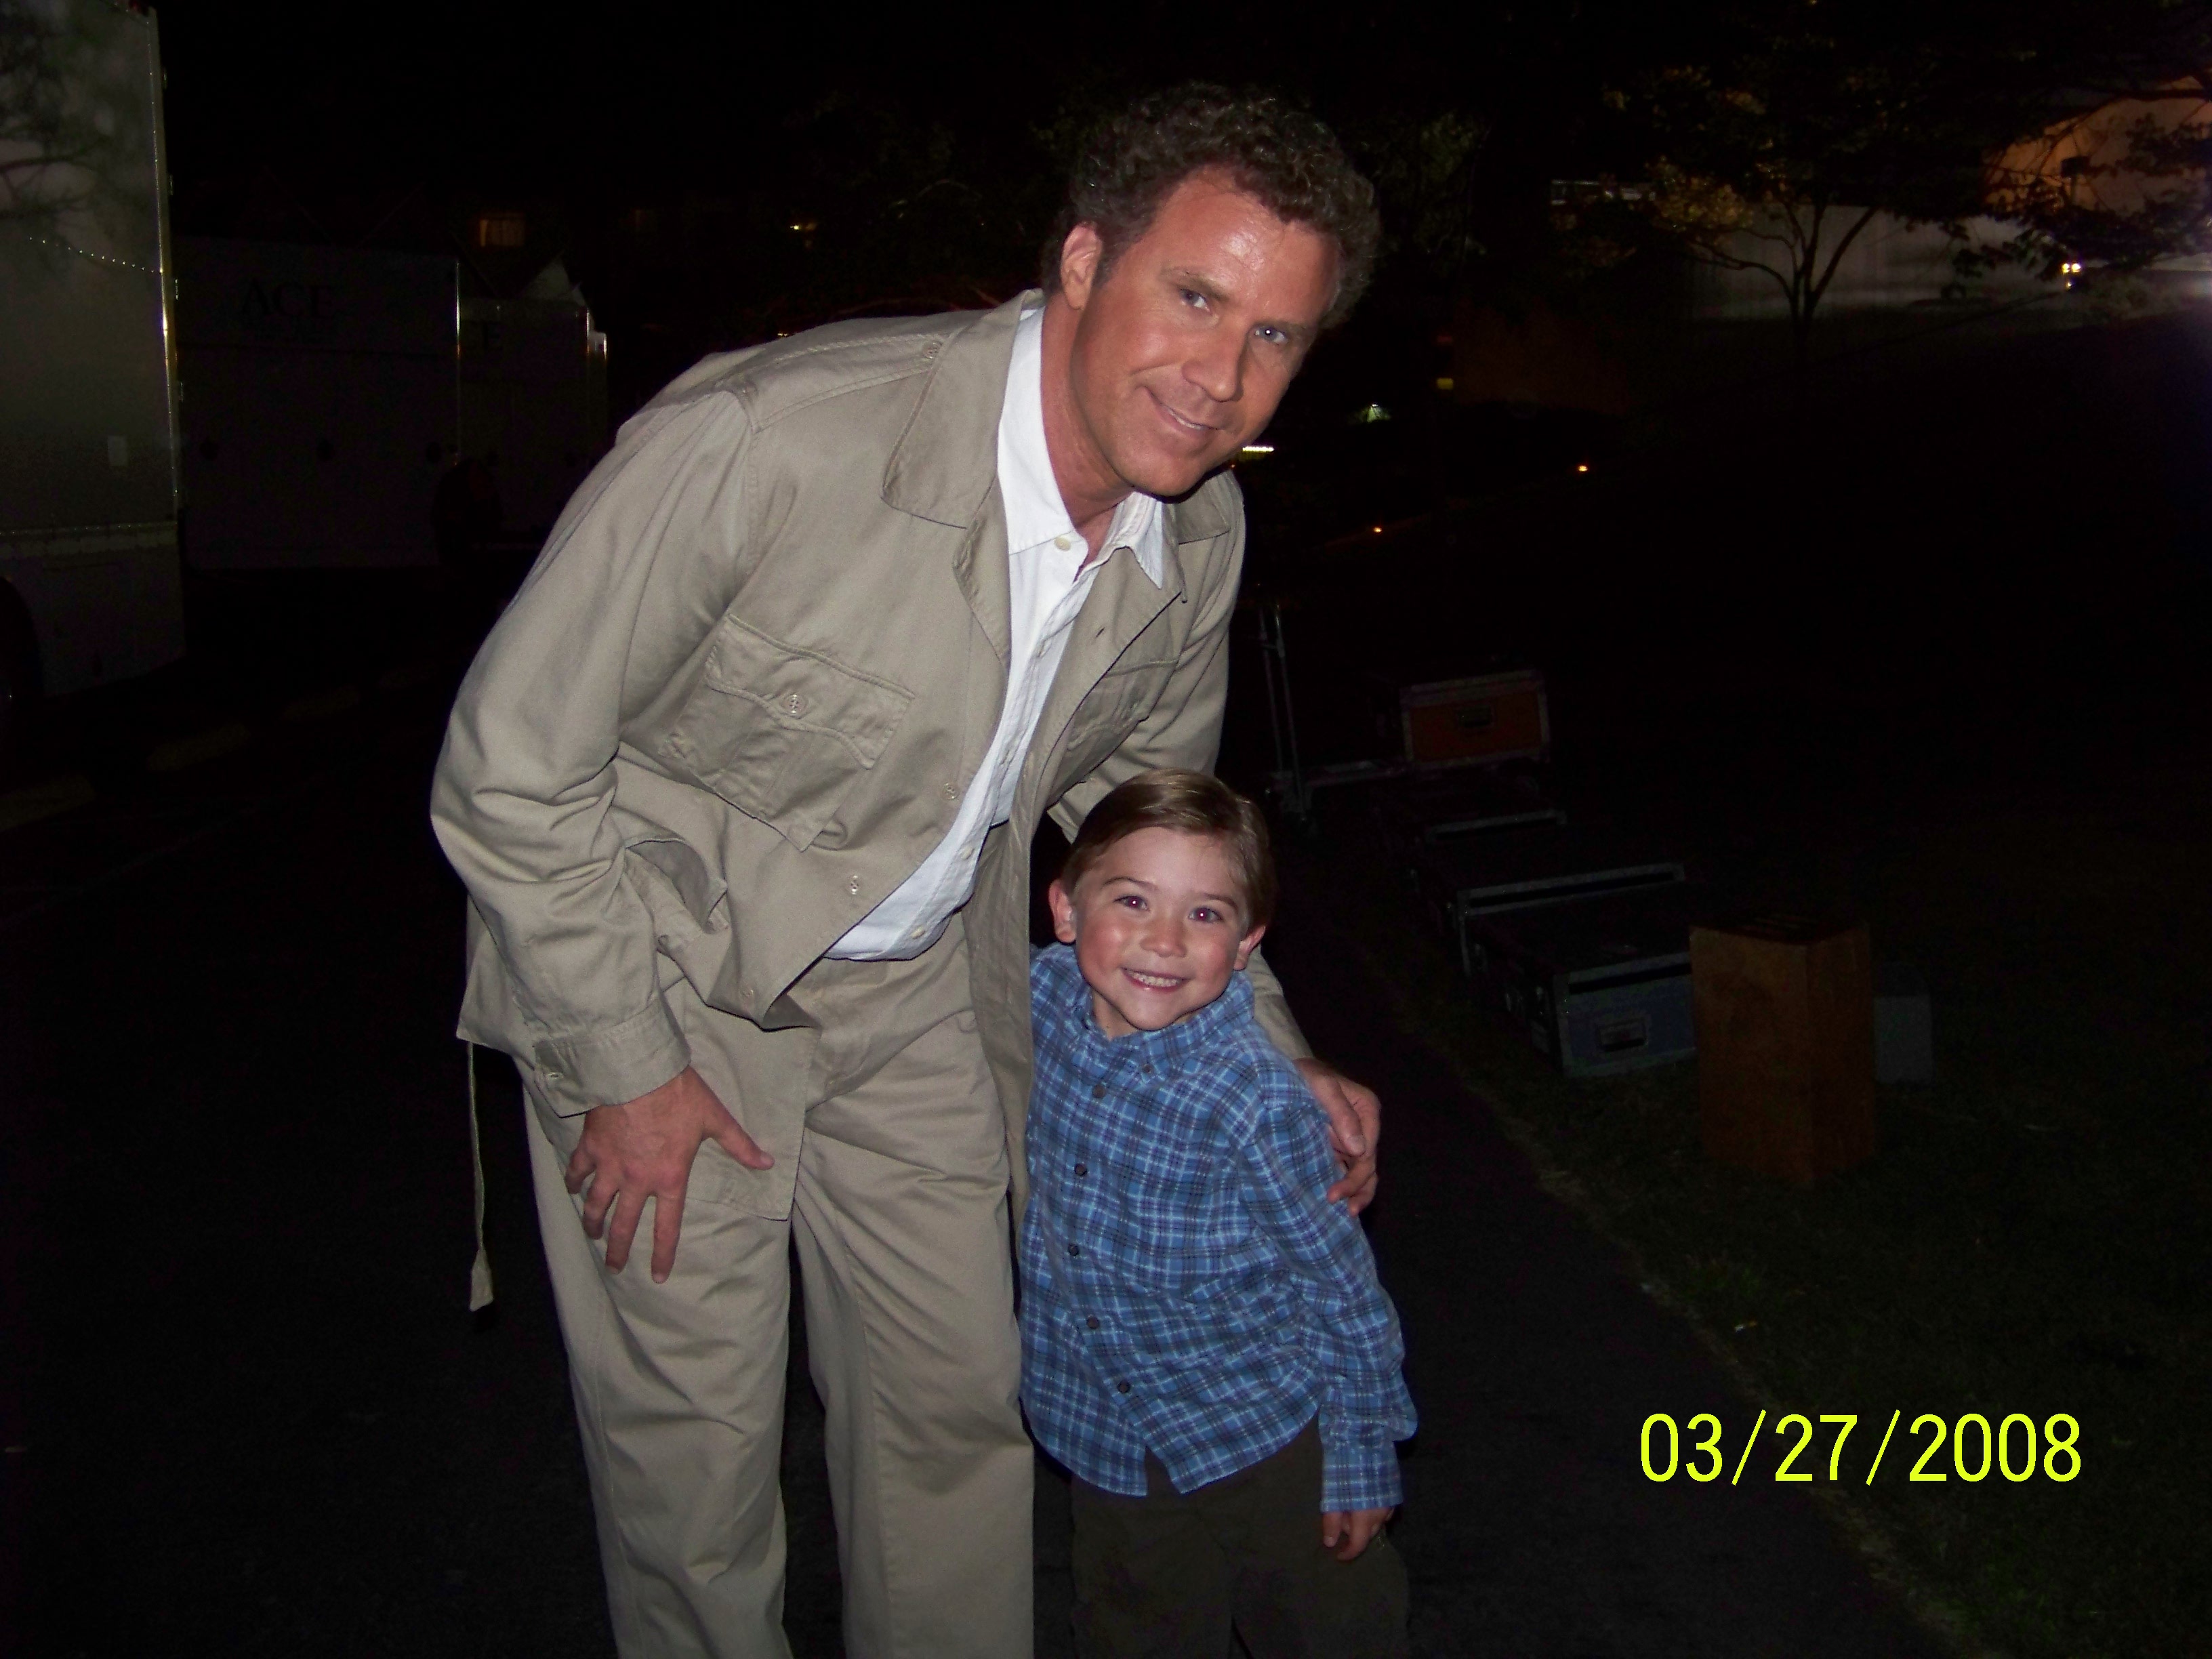 Raymond with Will Ferrell on the set of Land of the Lost